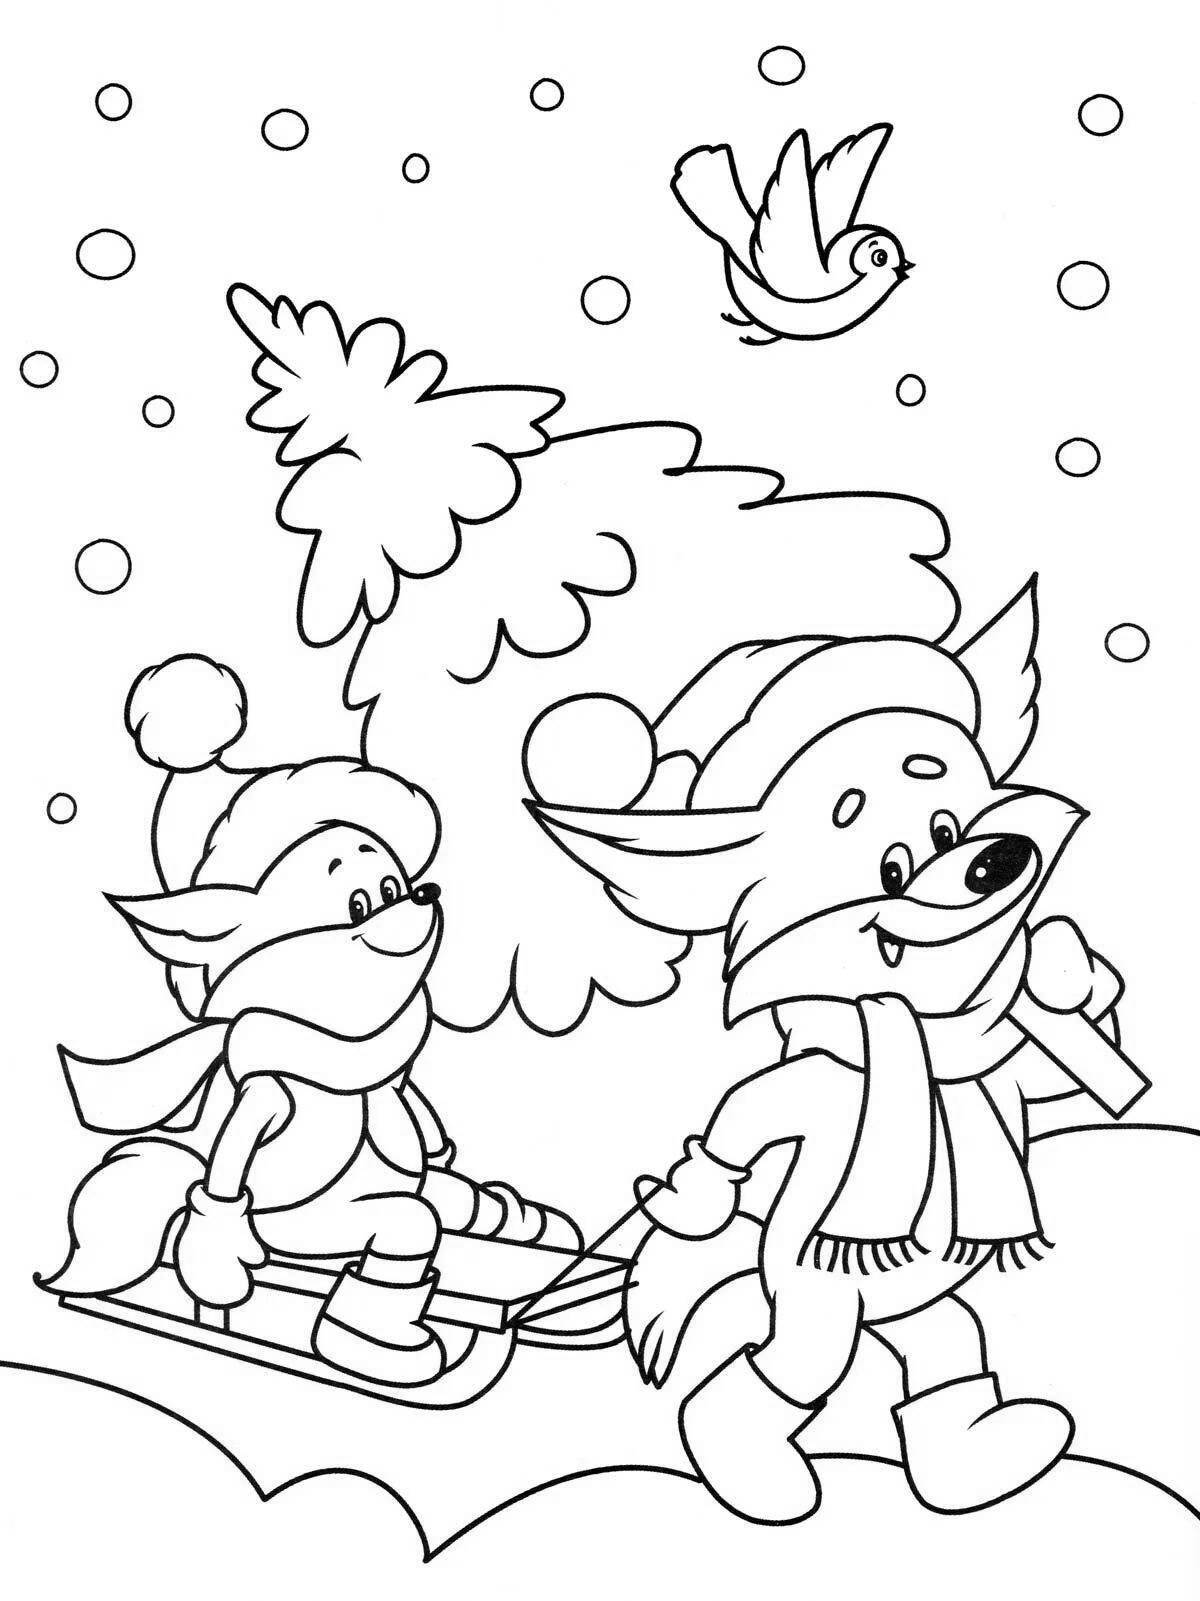 Glamorous winter coloring for kids